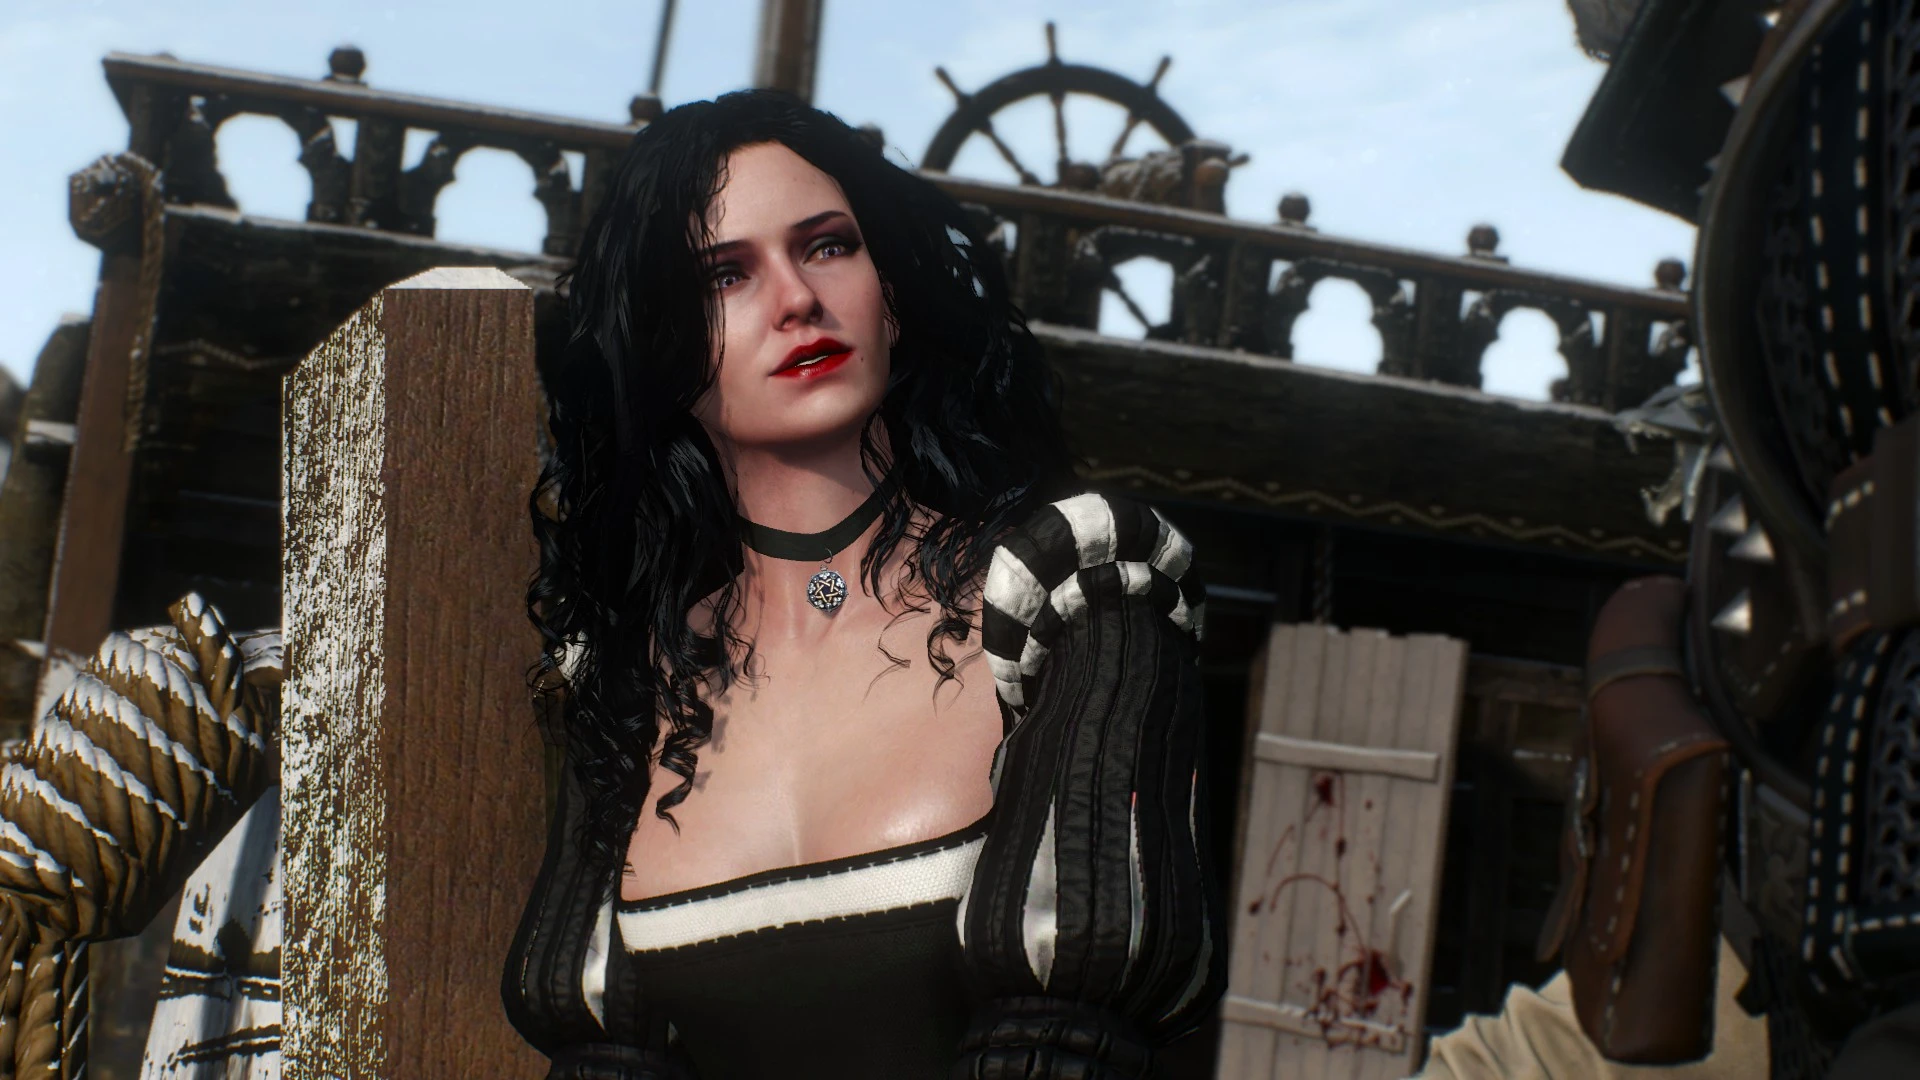 Yennefer of vengerberg the witcher 3 voiced standalone follower se фото 24